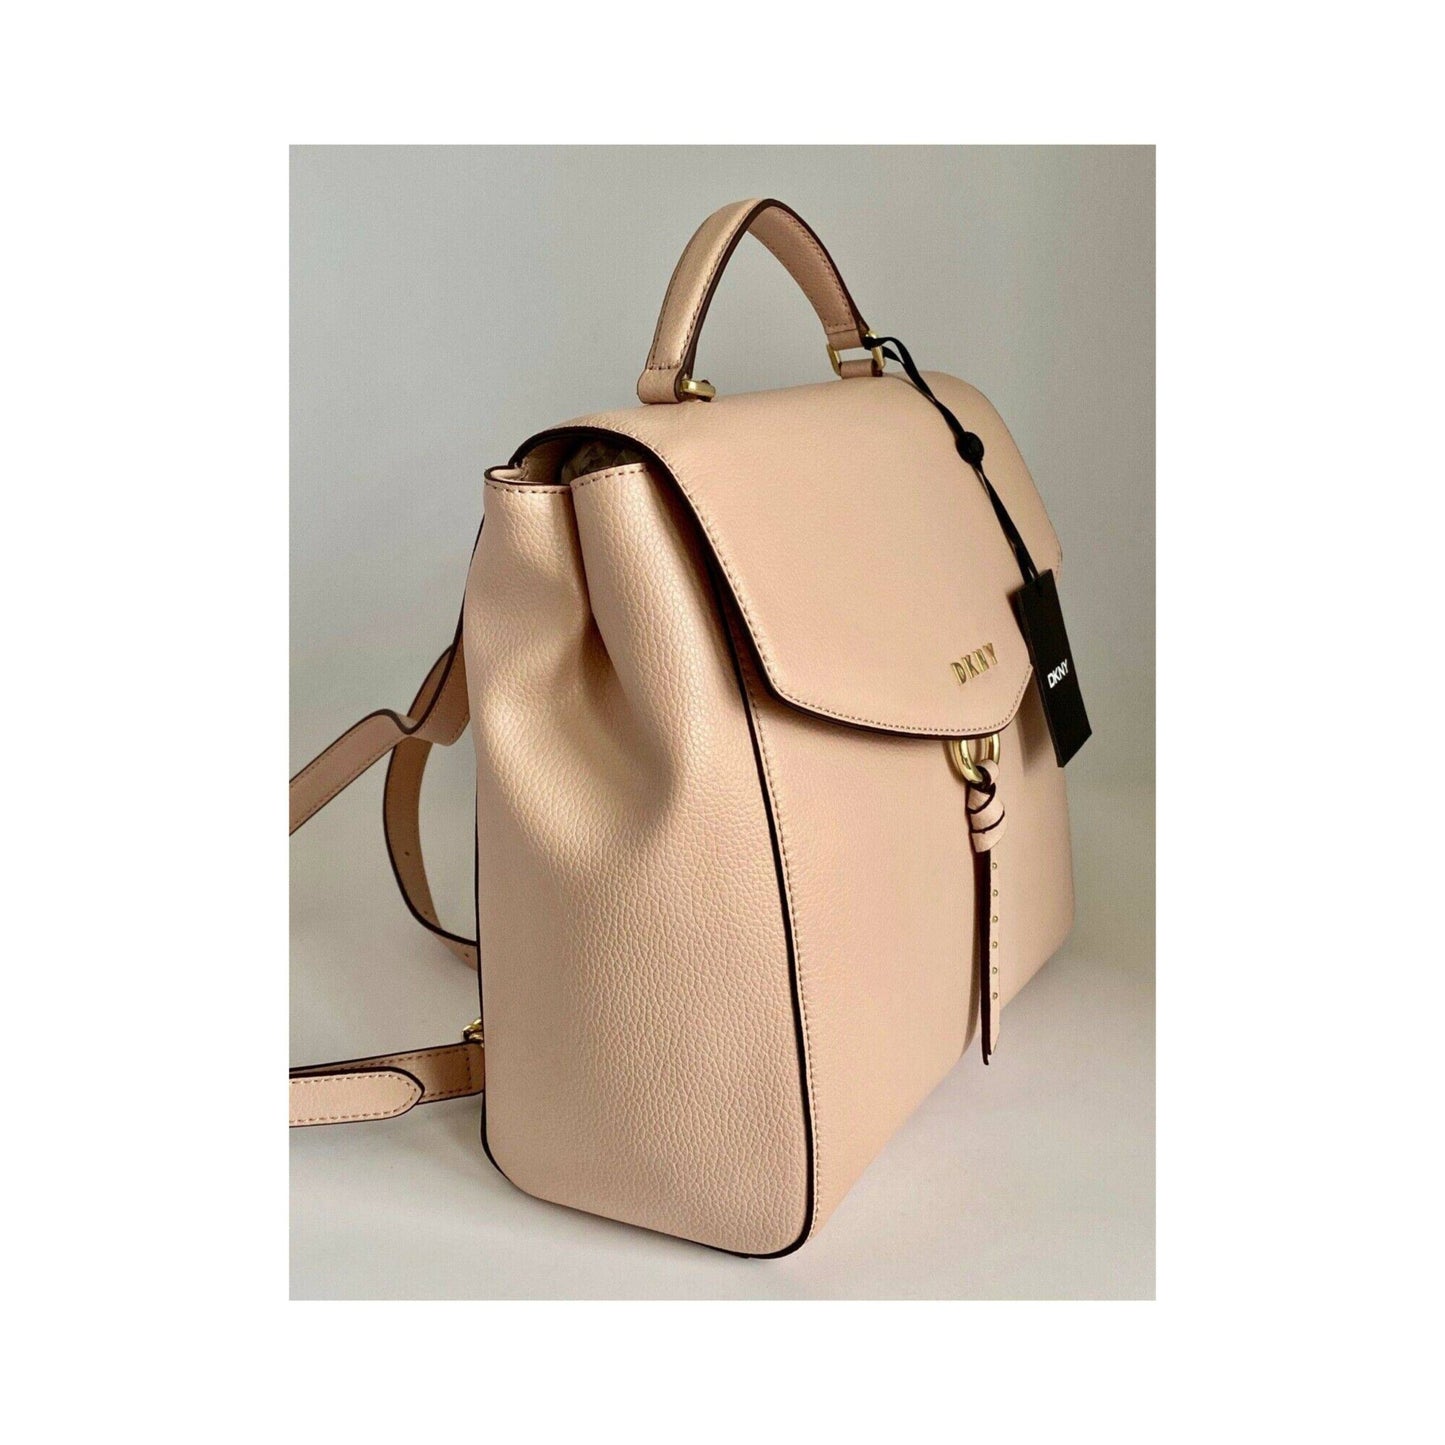 DKNY Lola Leather Backpack (Sand Color)